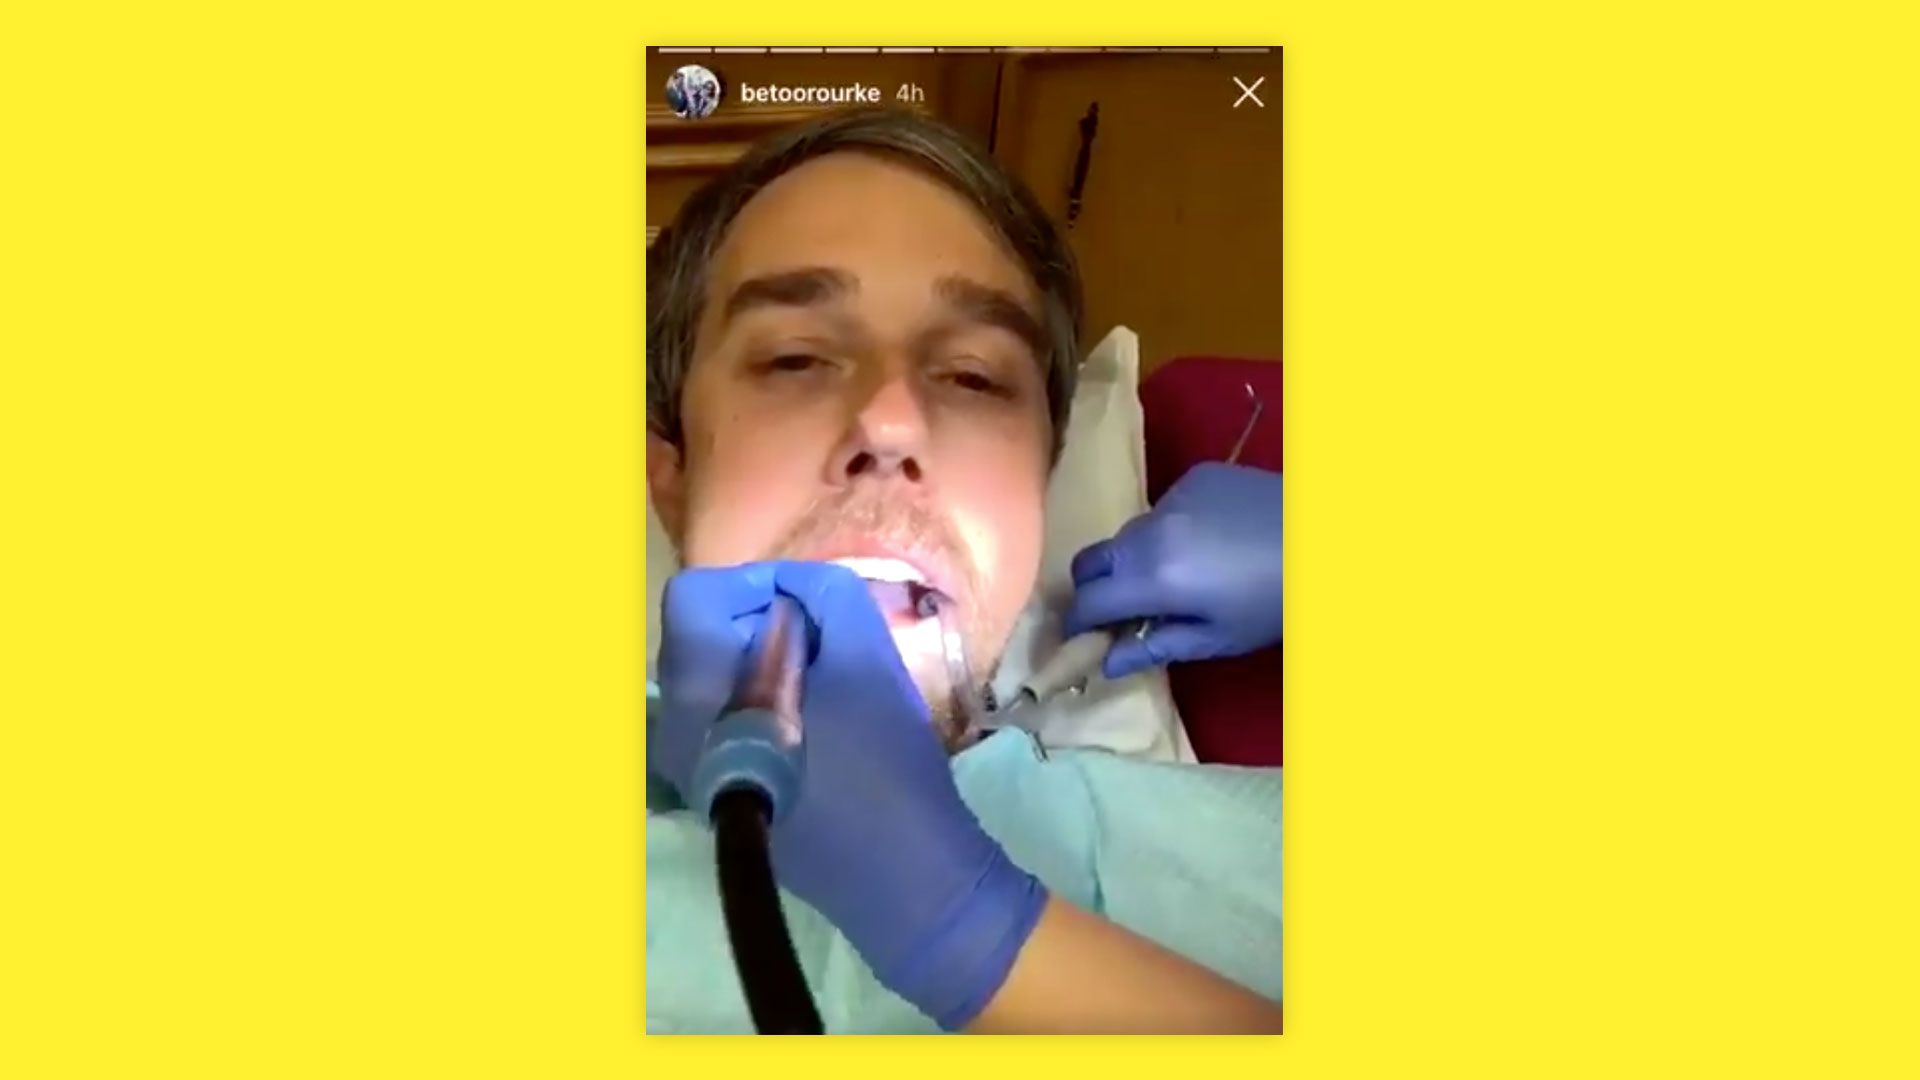 Still from Instagram video of Beto O'Rourke being worked on by dental hygienist